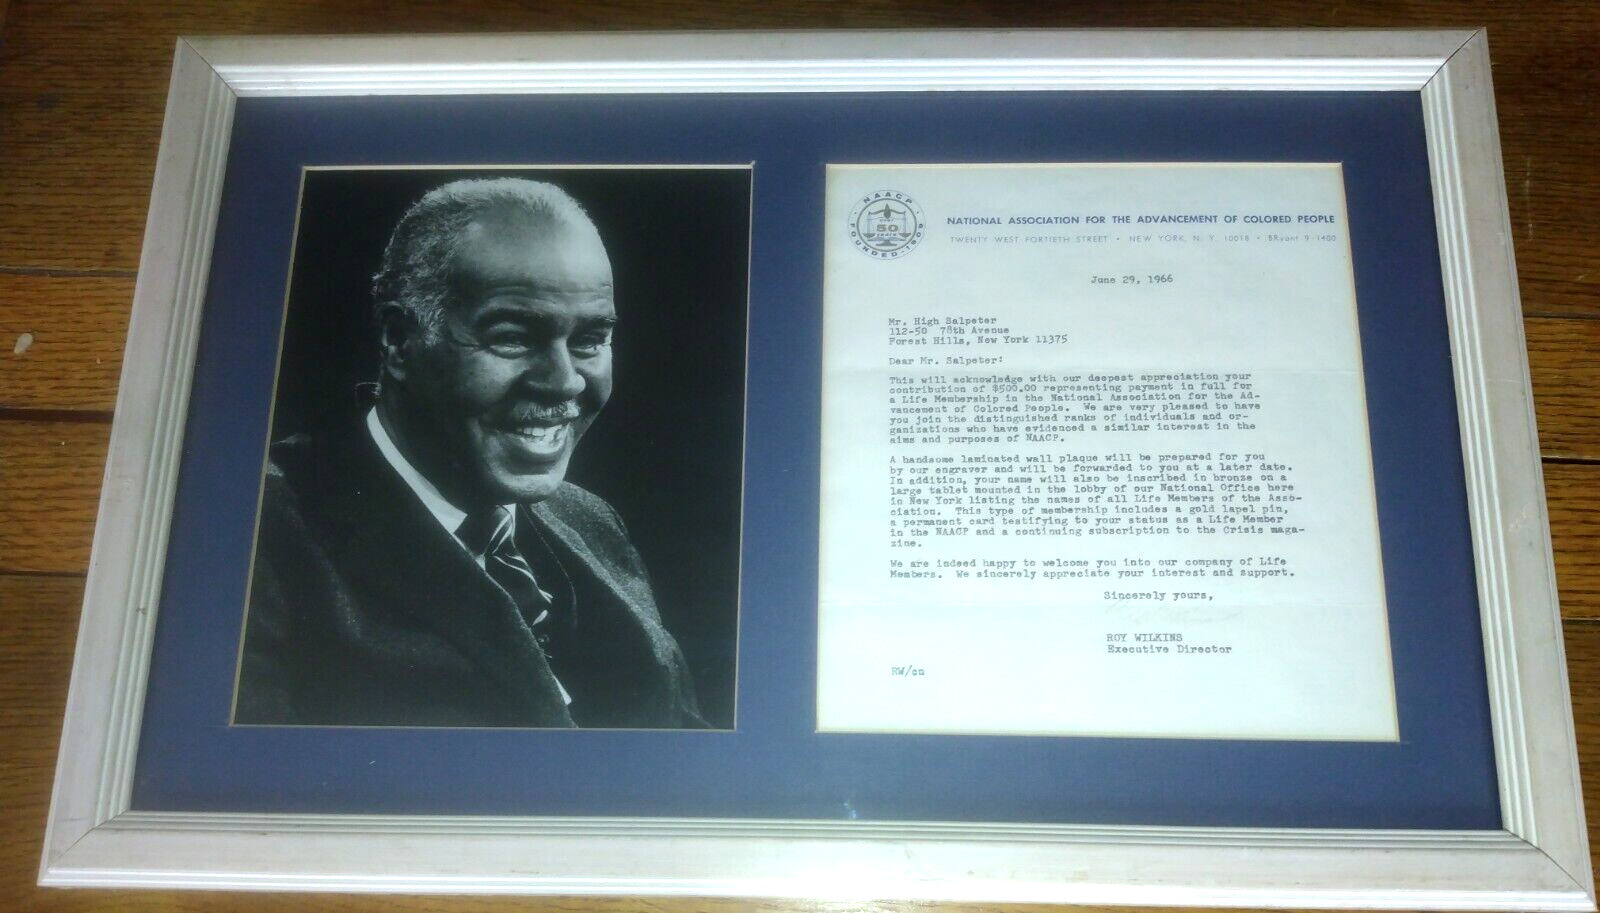 ROY WILKINS Signed 1966 NAACP Letter Handsomely Framed with 8x10 B/W Photograph